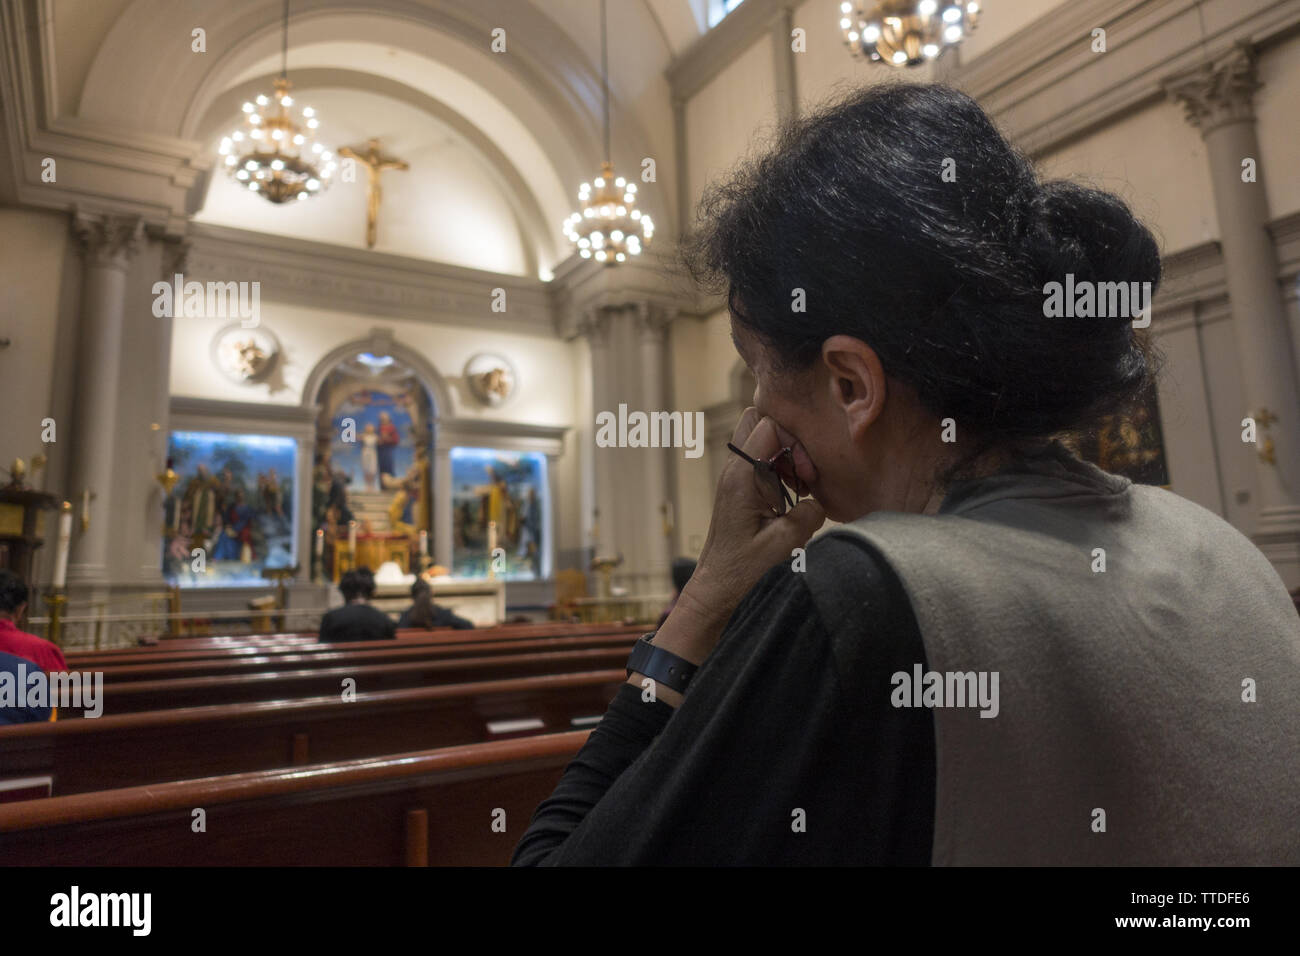 Woman deep in thought at a Catholic Church in midtown Manhattan. Stock Photo